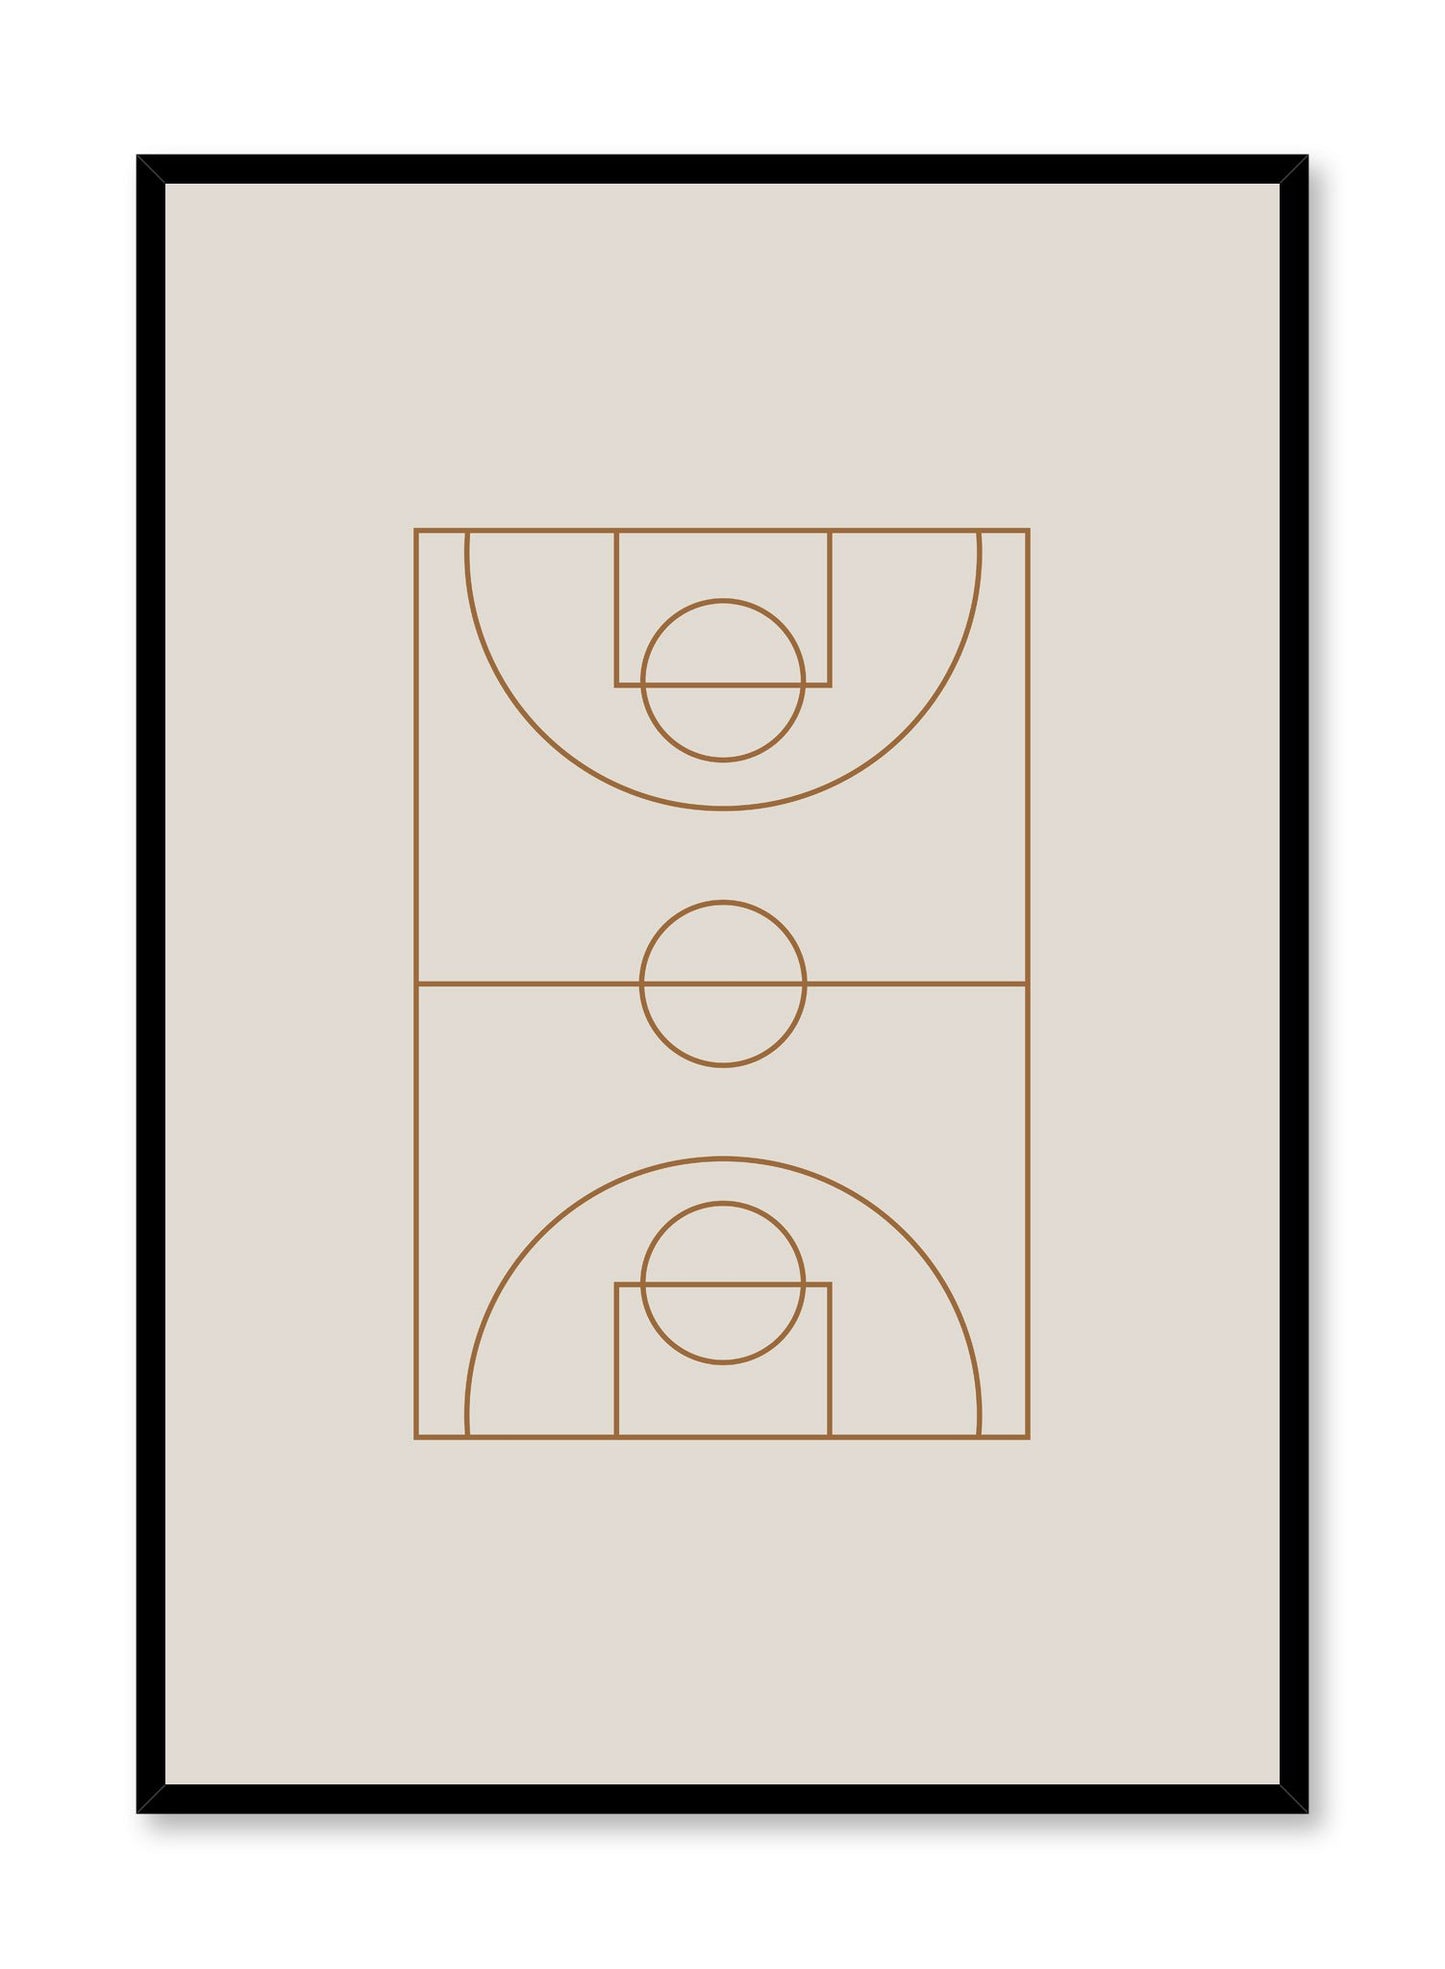 Minimalist design poster by Opposite Wall with Beige Mood abstract graphic design basketball court